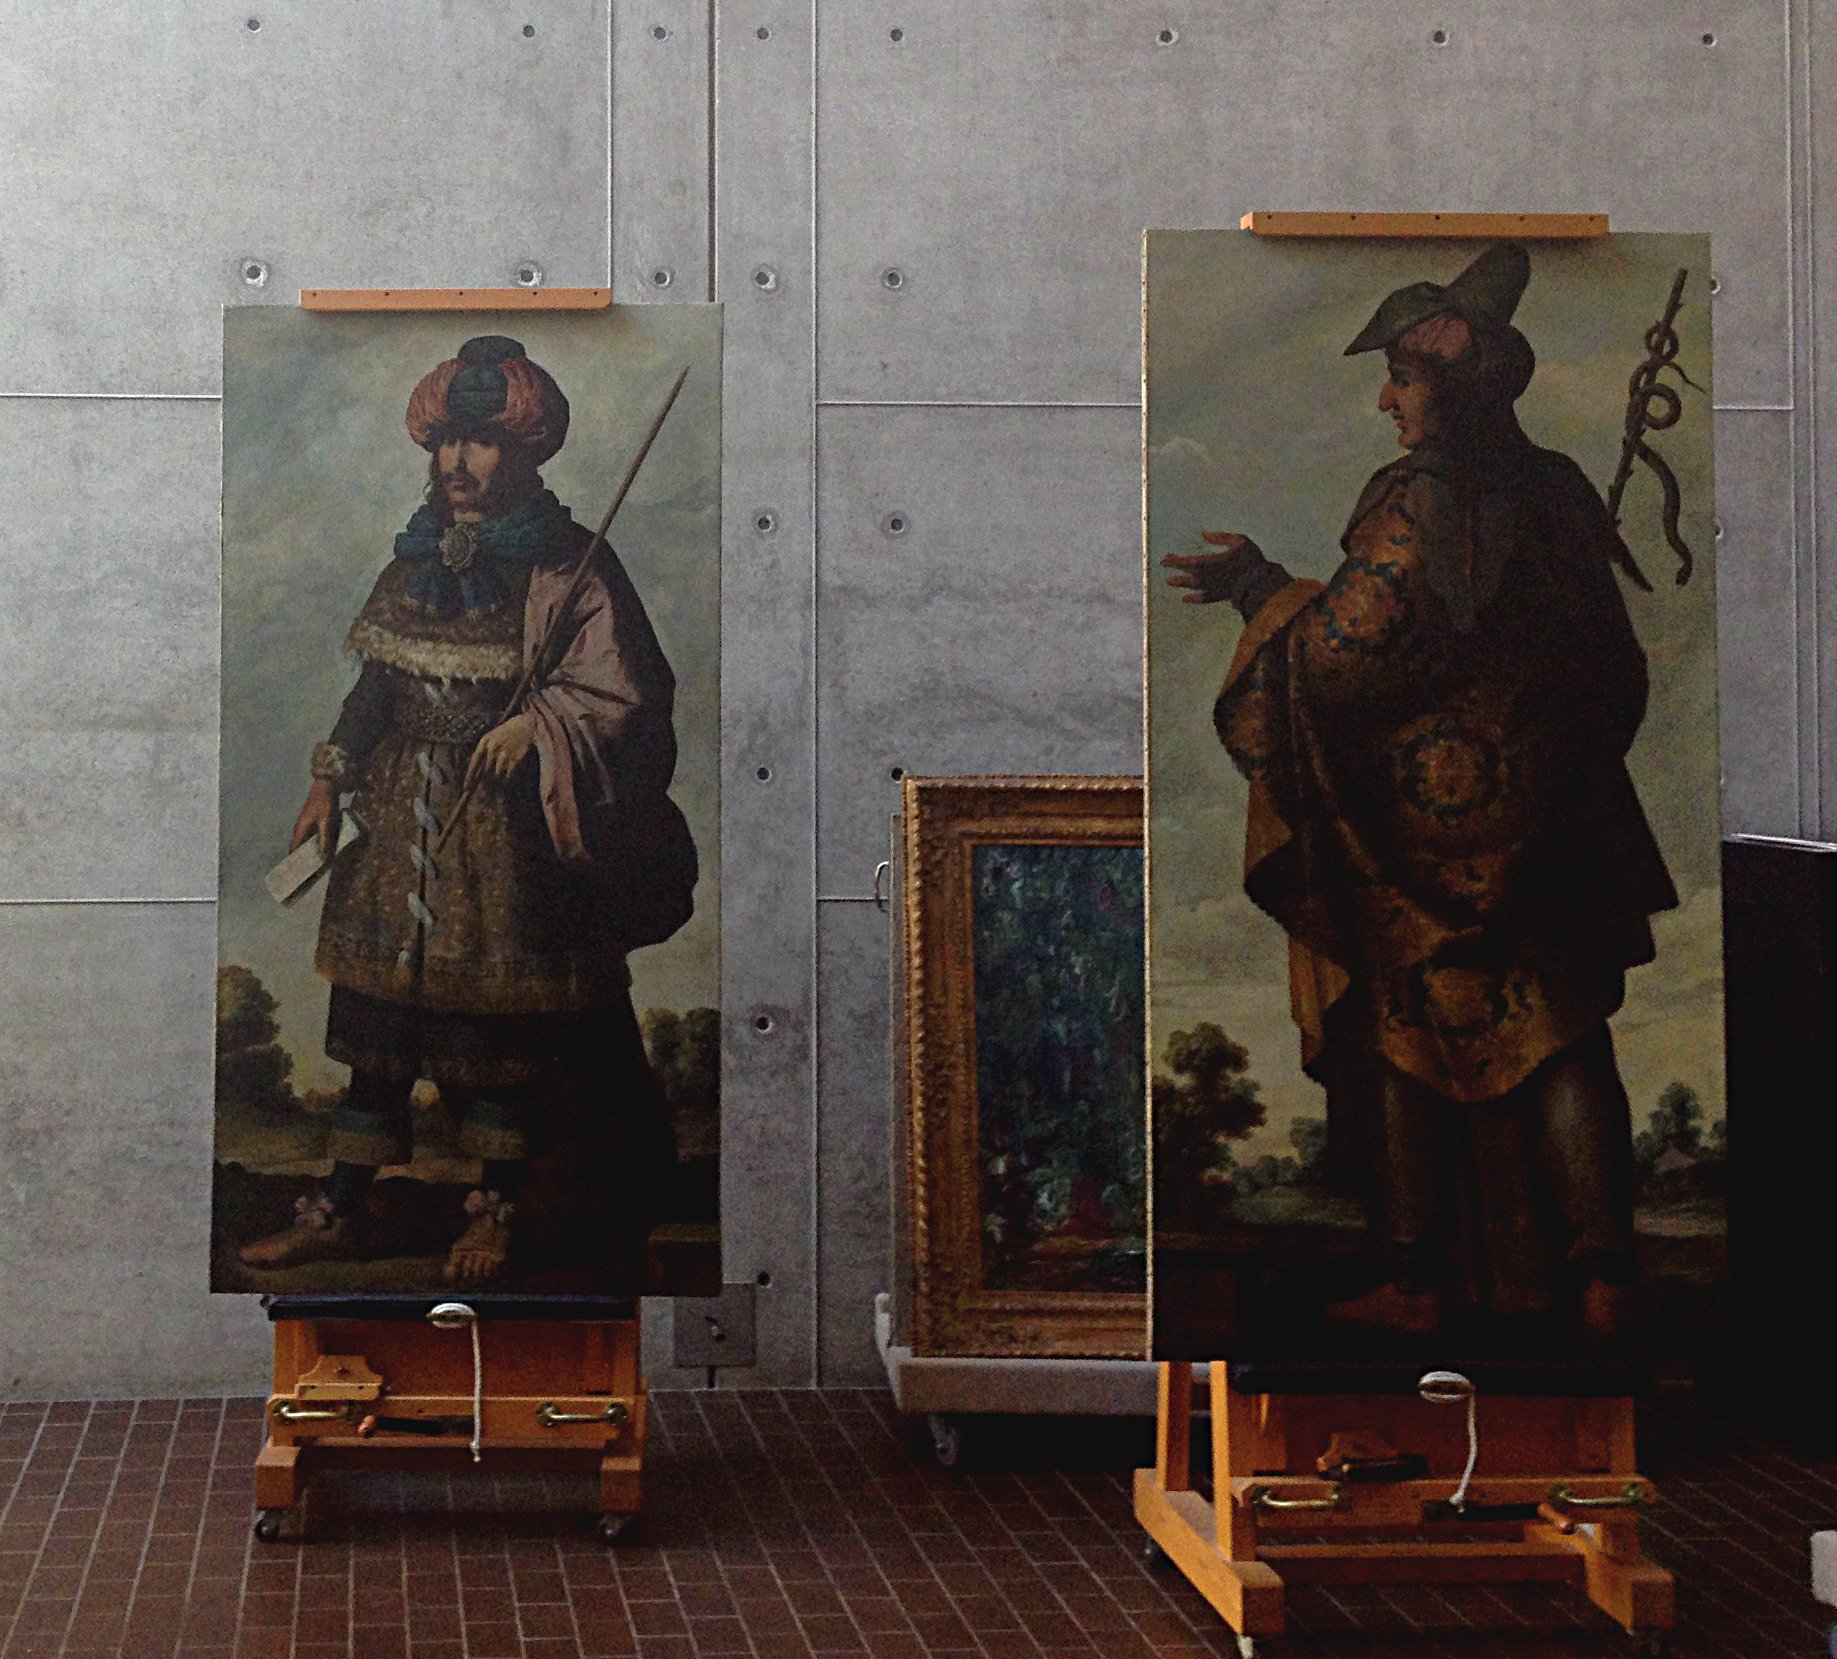 Zurbaron paintings in the Kimbell's conservation studio